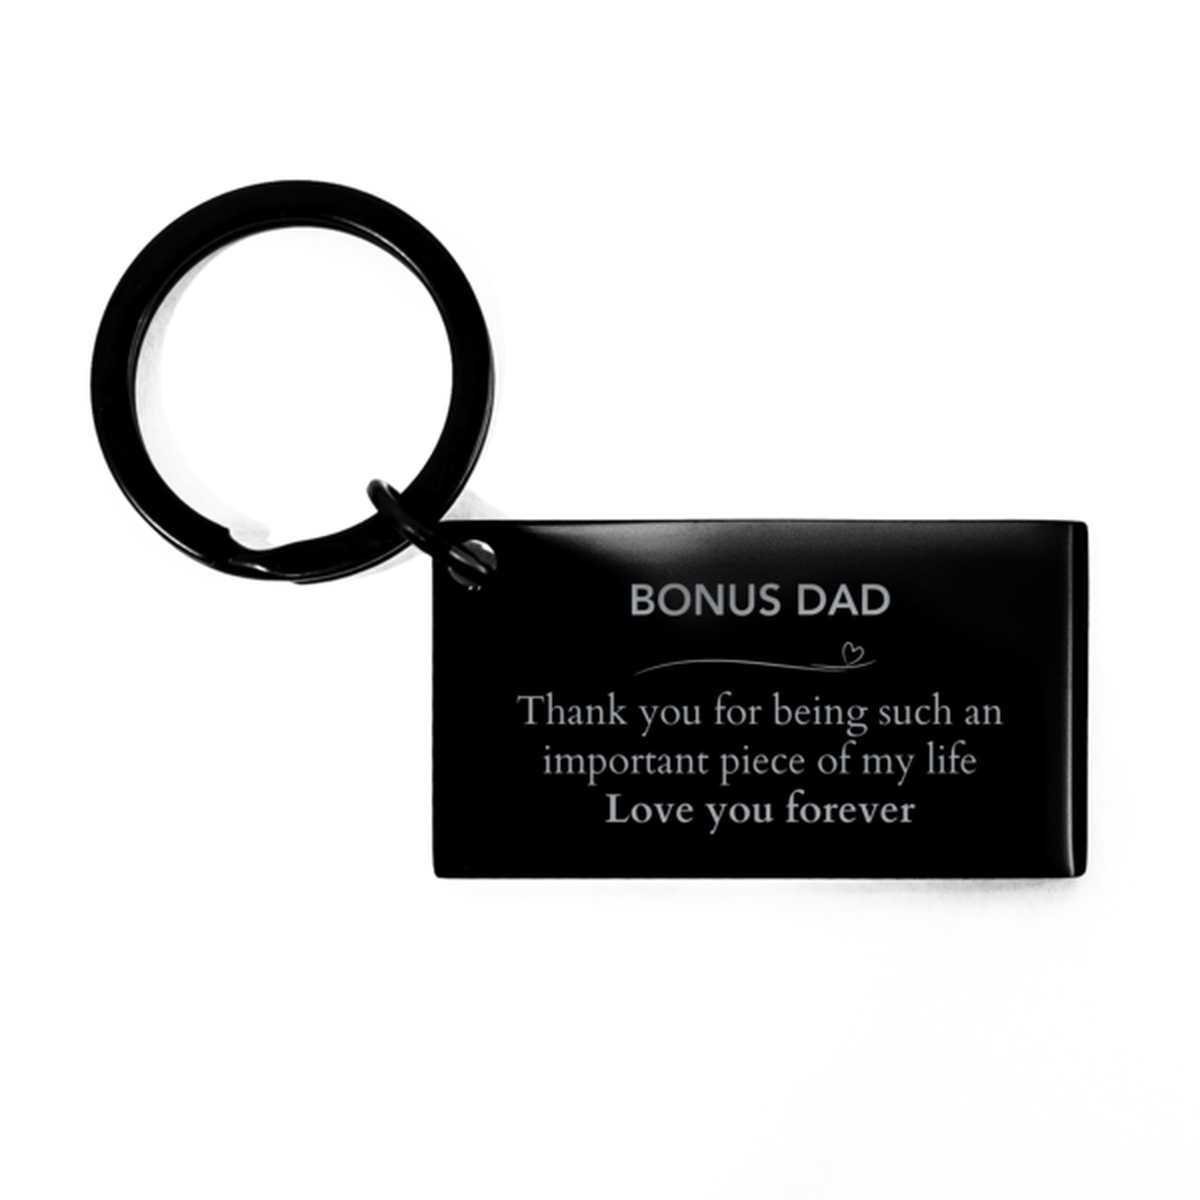 Appropriate Bonus Dad Keychain Epic Birthday Gifts for Bonus Dad Thank you for being such an important piece of my life Bonus Dad Christmas Mothers Fathers Day